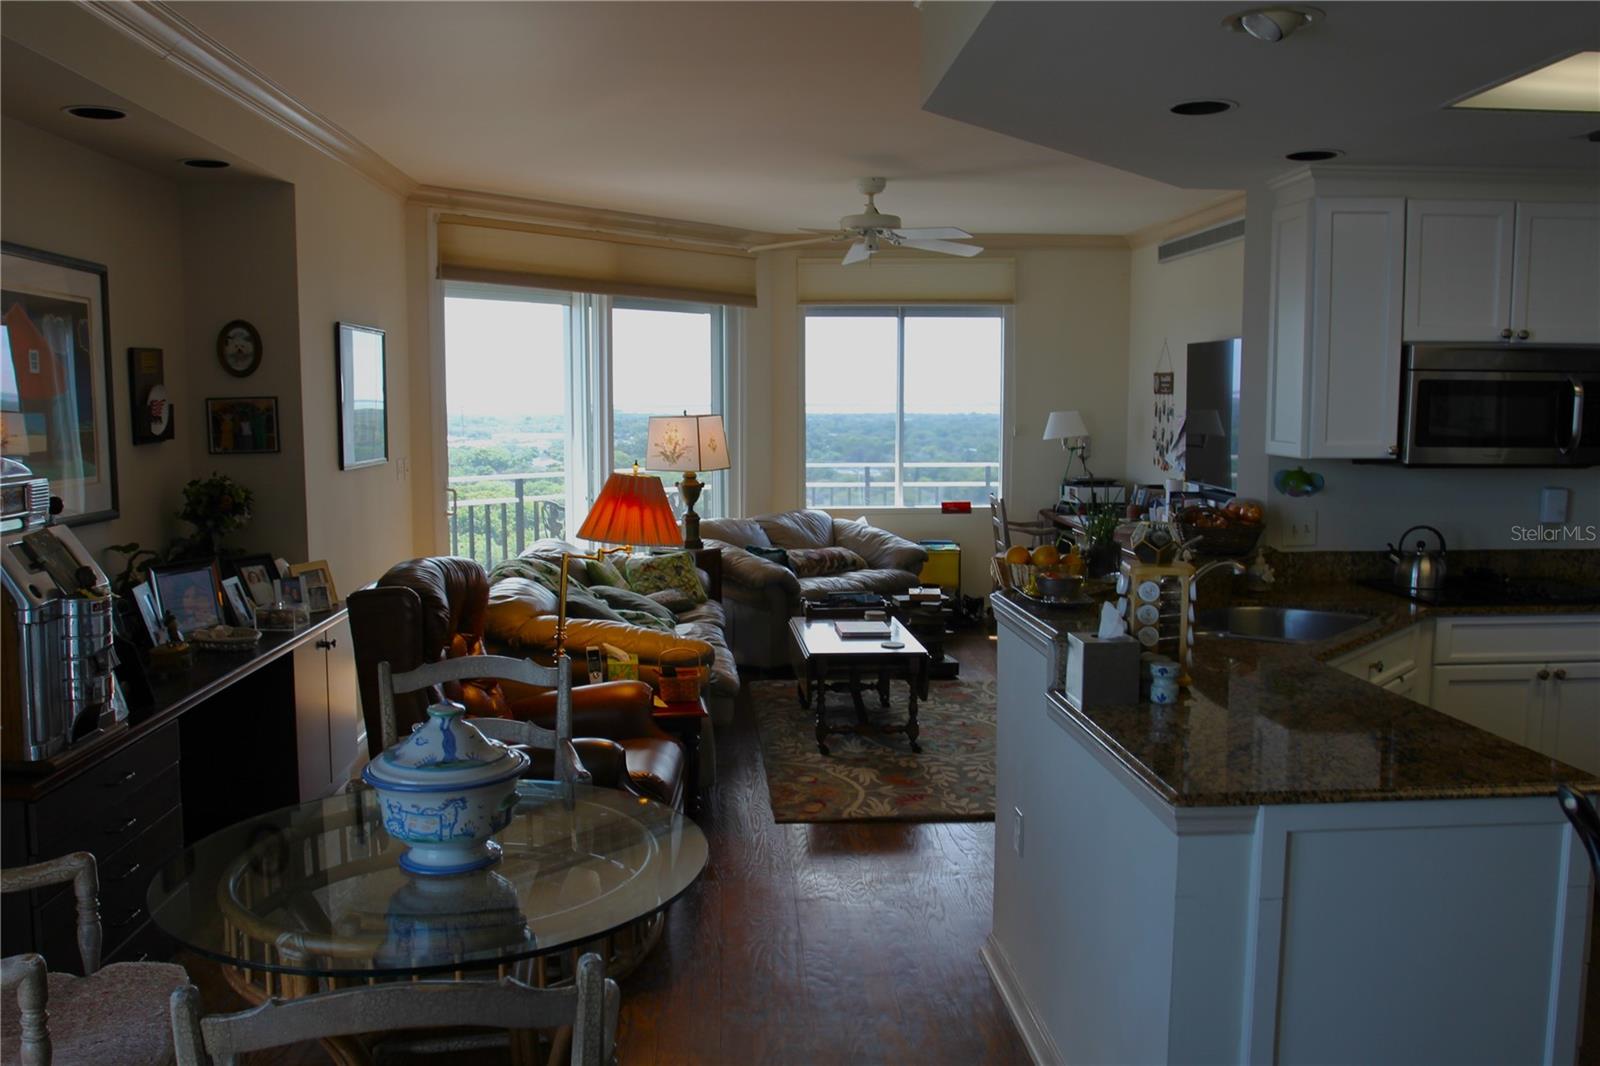 Eat-In Kitchen Overlooks The Family Room.